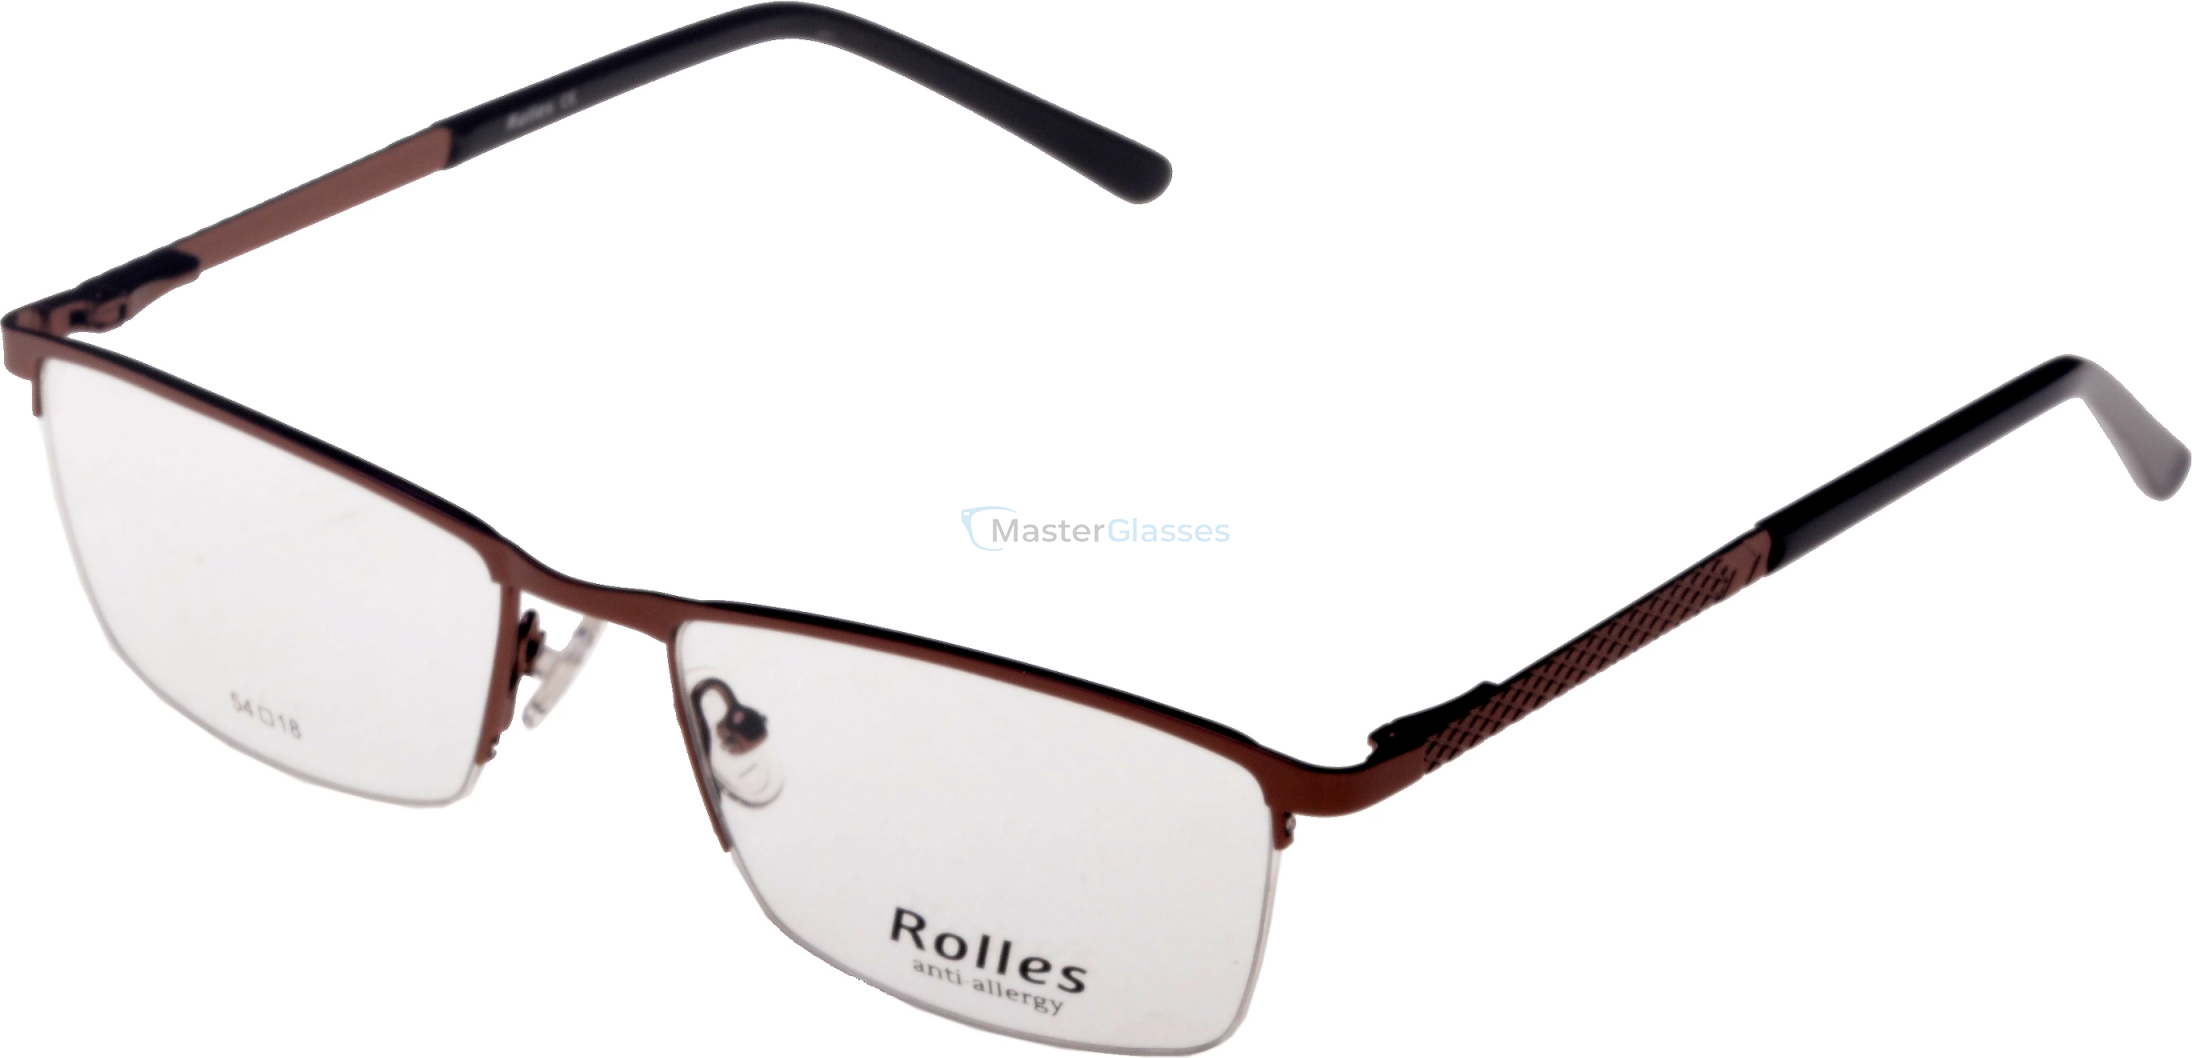  Rolles 630 02